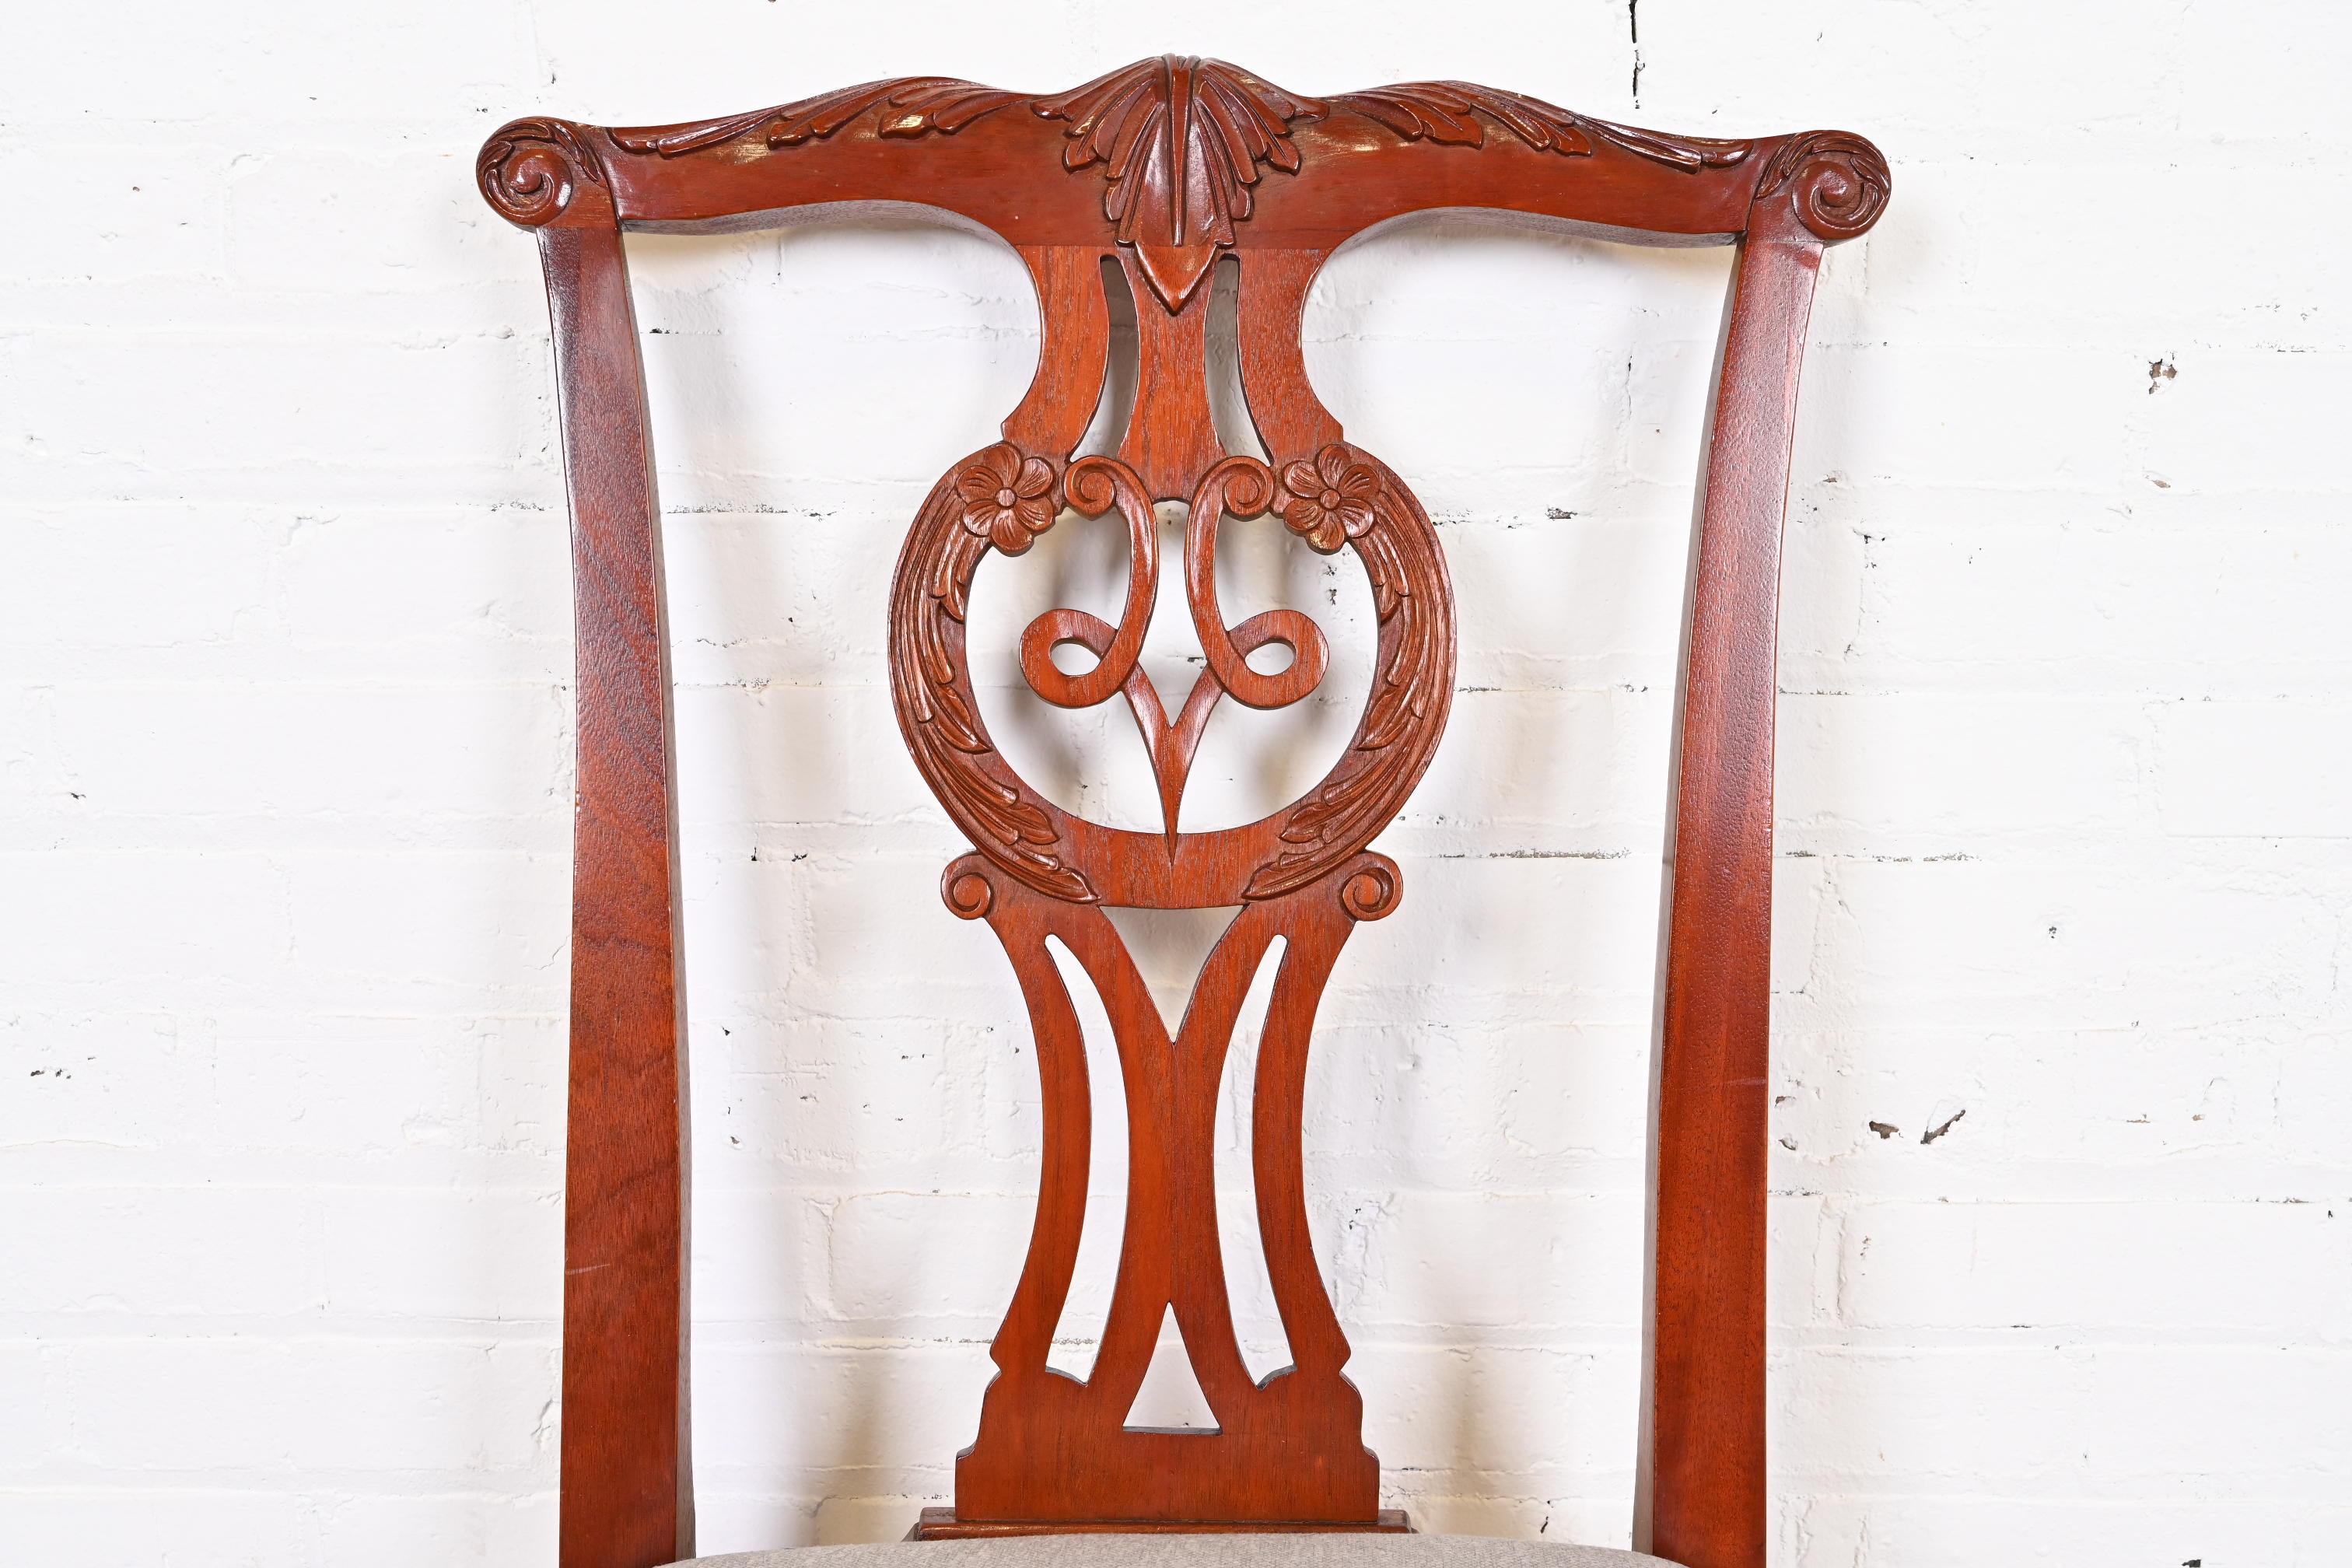 Baker Furniture Chippendale Carved Mahogany Dining Chairs, Set of Six 2